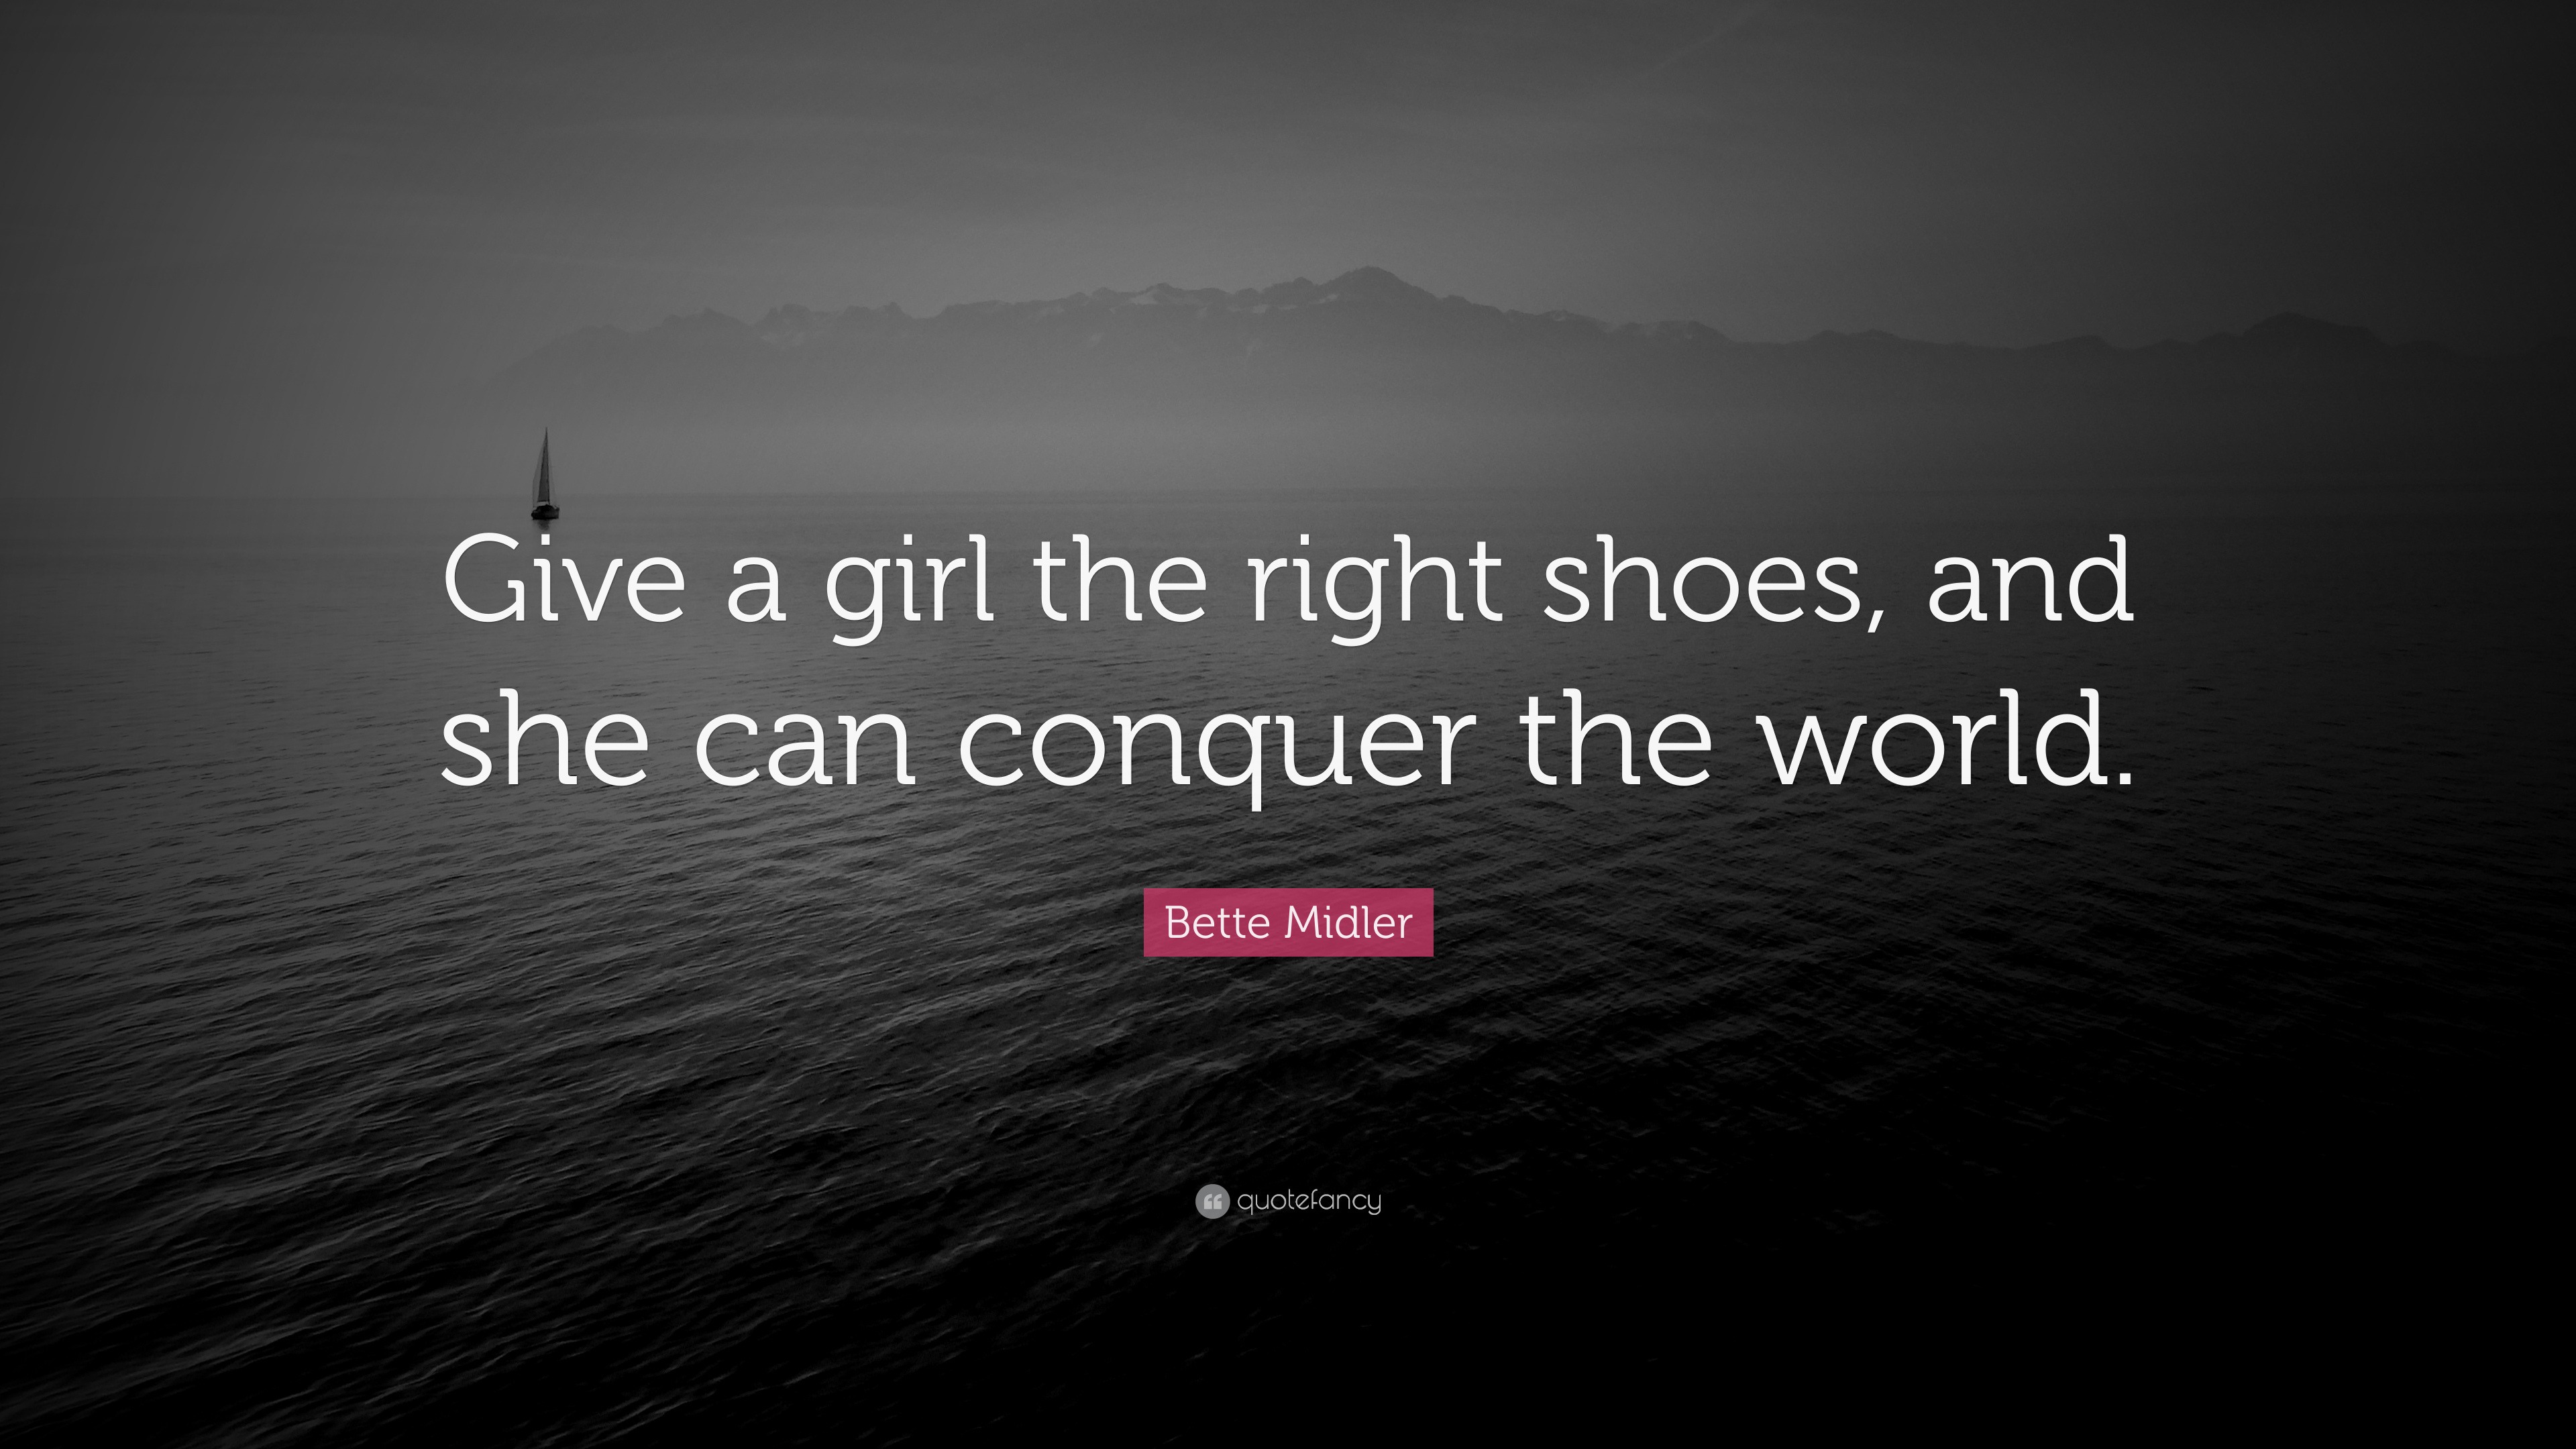 Bette Midler Quote “give A Girl The Right Shoes And She Can Conquer The World” 